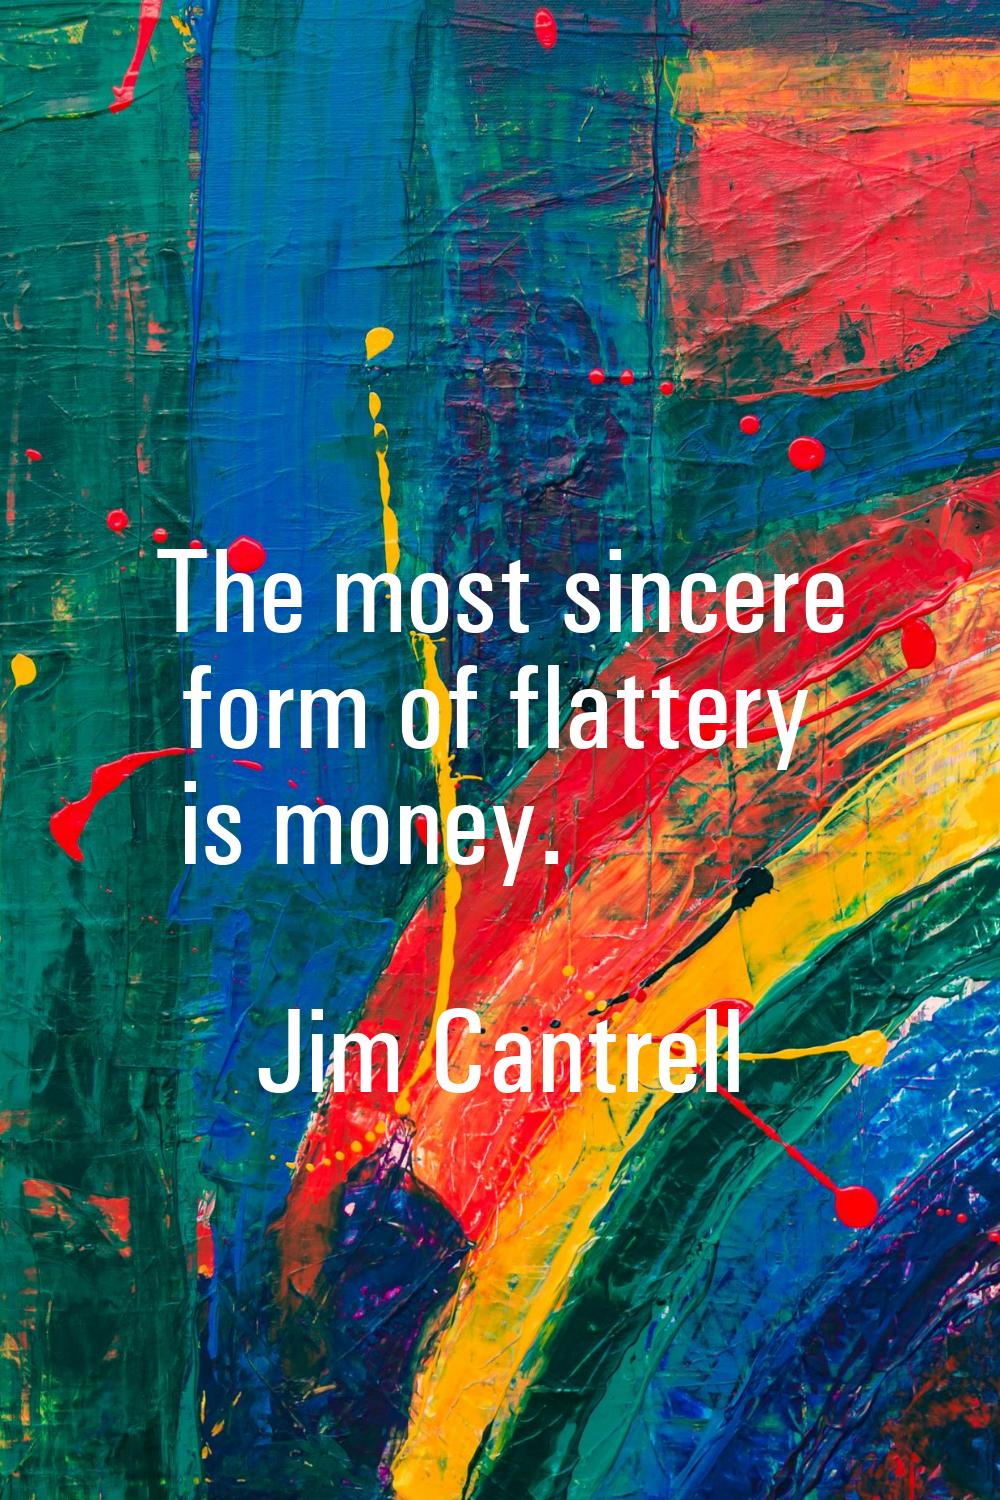 The most sincere form of flattery is money.